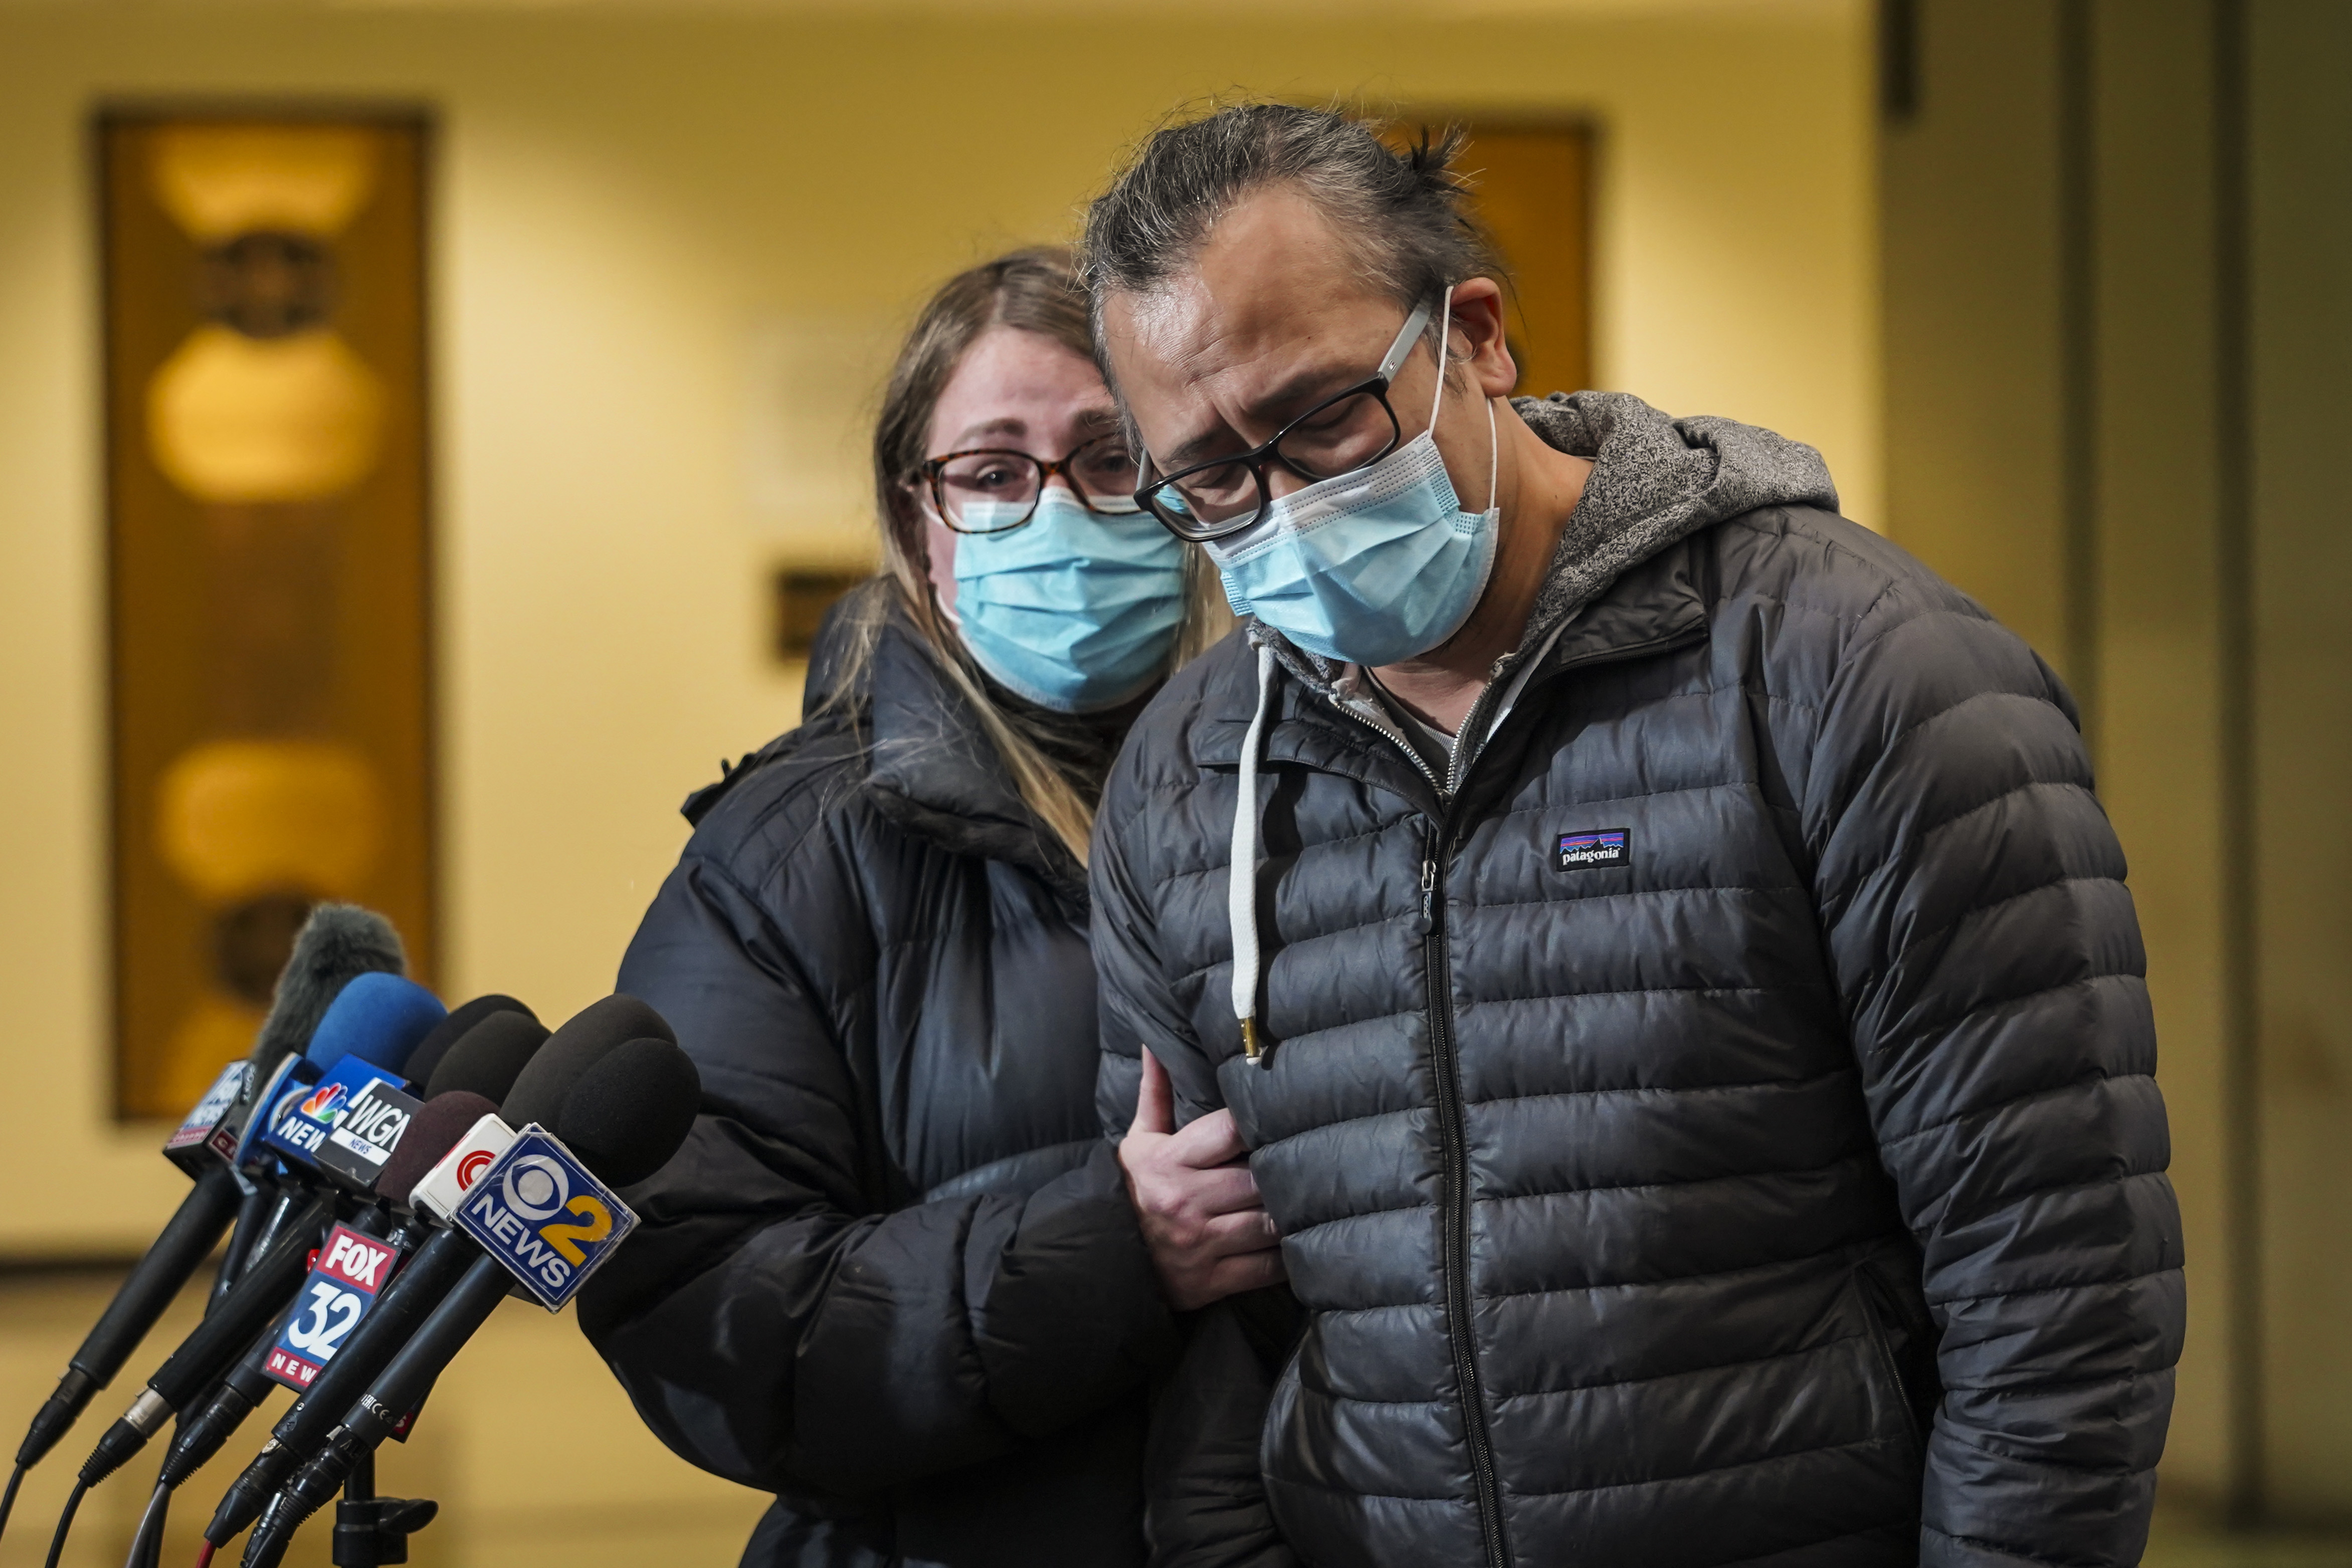 William Tse, the son of Woom Sing Tse, speaks to reporters on Dec. 9 at the Leighton Criminal Courthouse after a bond hearing for the man charged with fatally shooting his 71-year-old father.